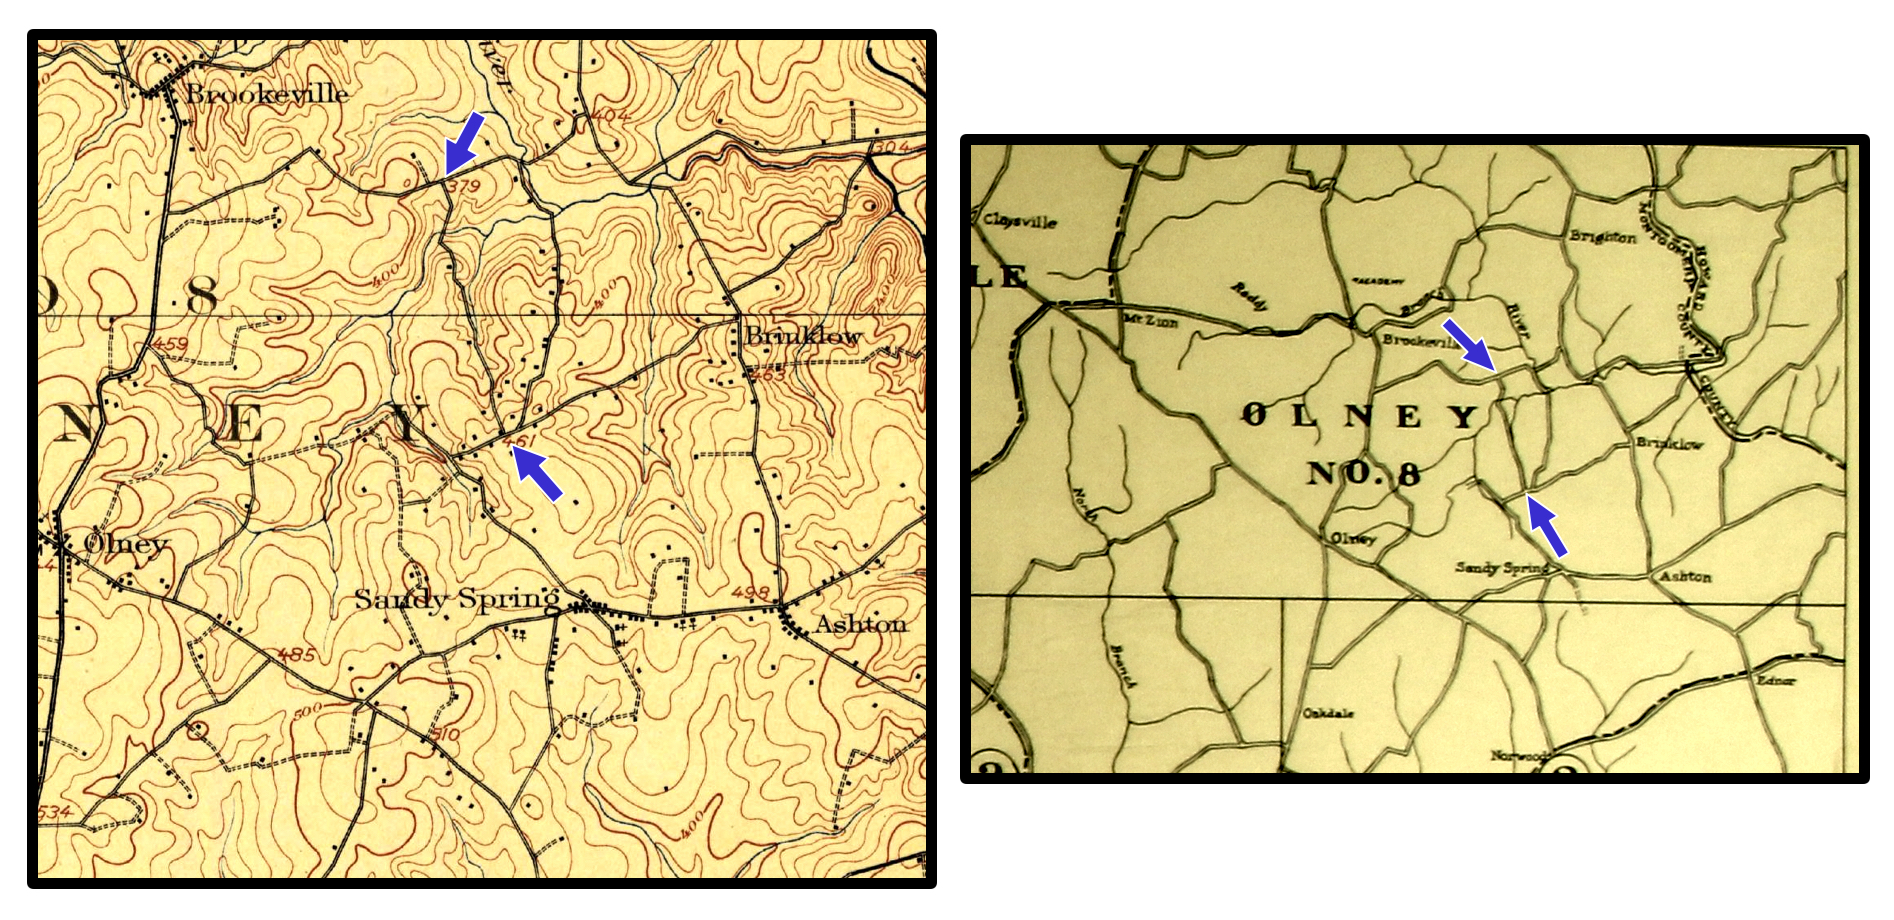 Historic maps illustrating the Farm Road corridor (blue arrows mark termini). The map on the left is from the 1908 U.S.G.S. Rockville quadrangle and the map on the right is from the 1916 Real Estate Atlas of the Part of Montgomery County Adjacent to the District of Columbia. Image credit: Public domain.